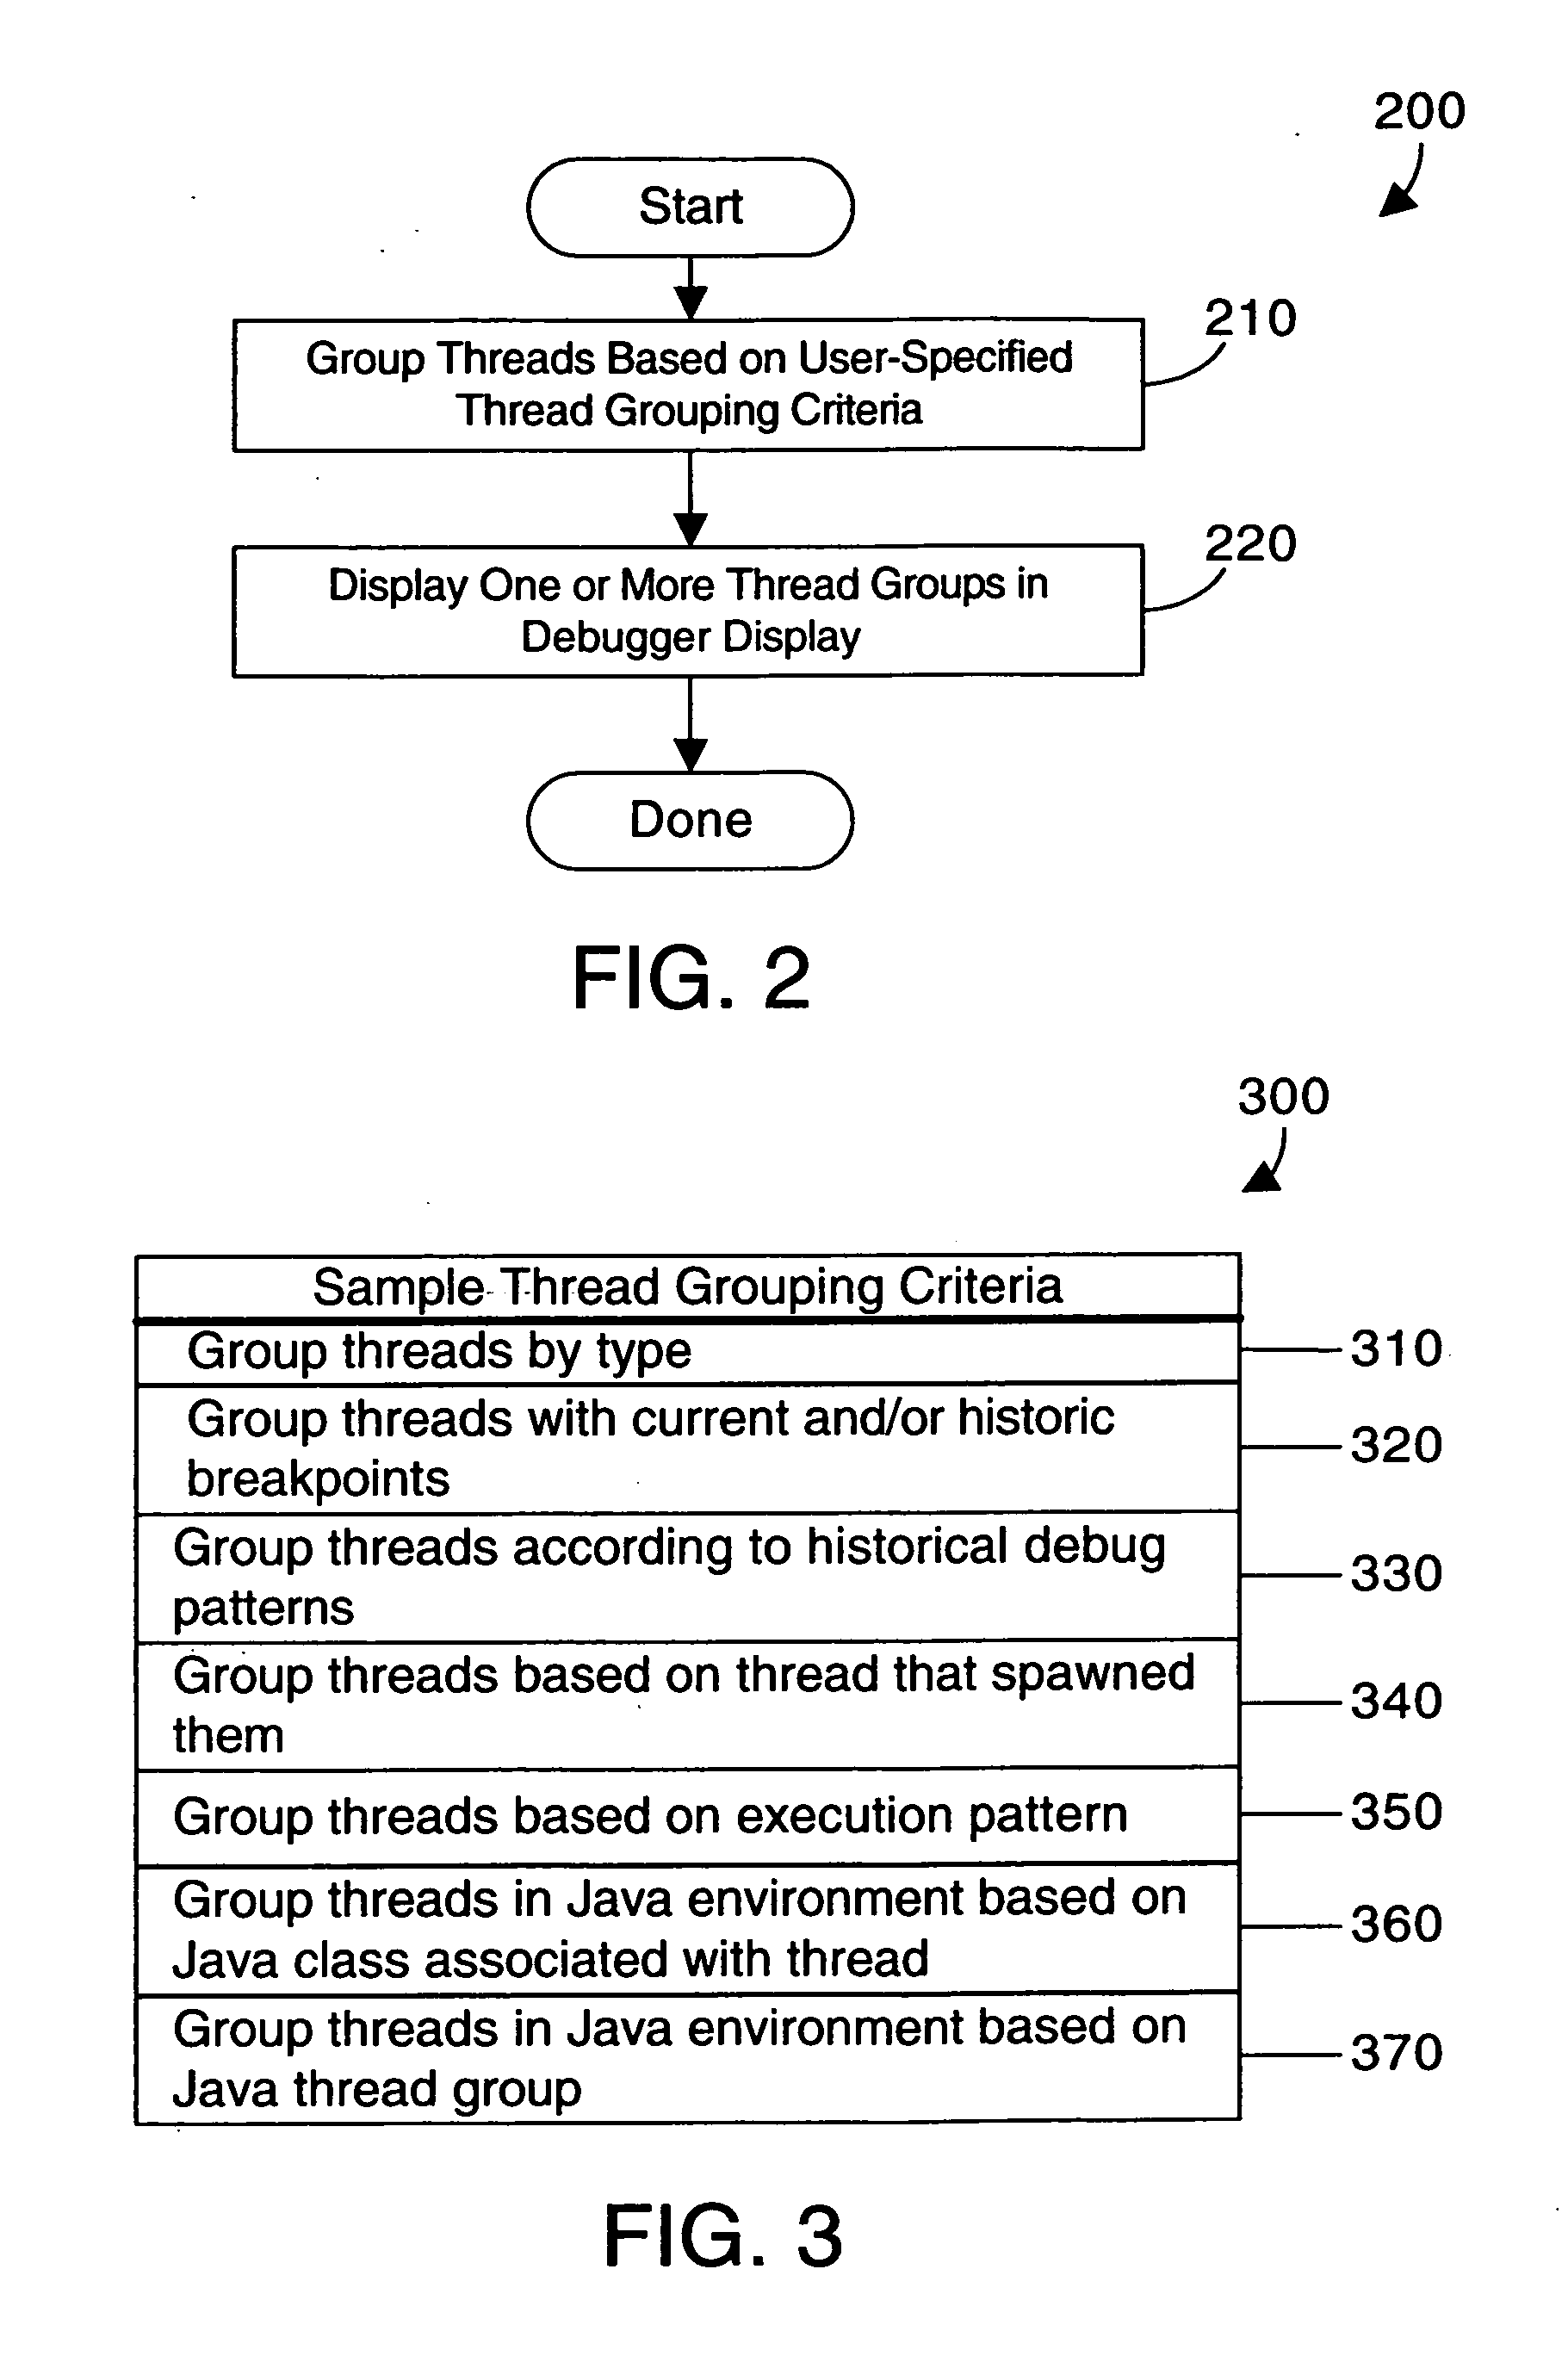 Apparatus and method for grouping threads in a debugger display